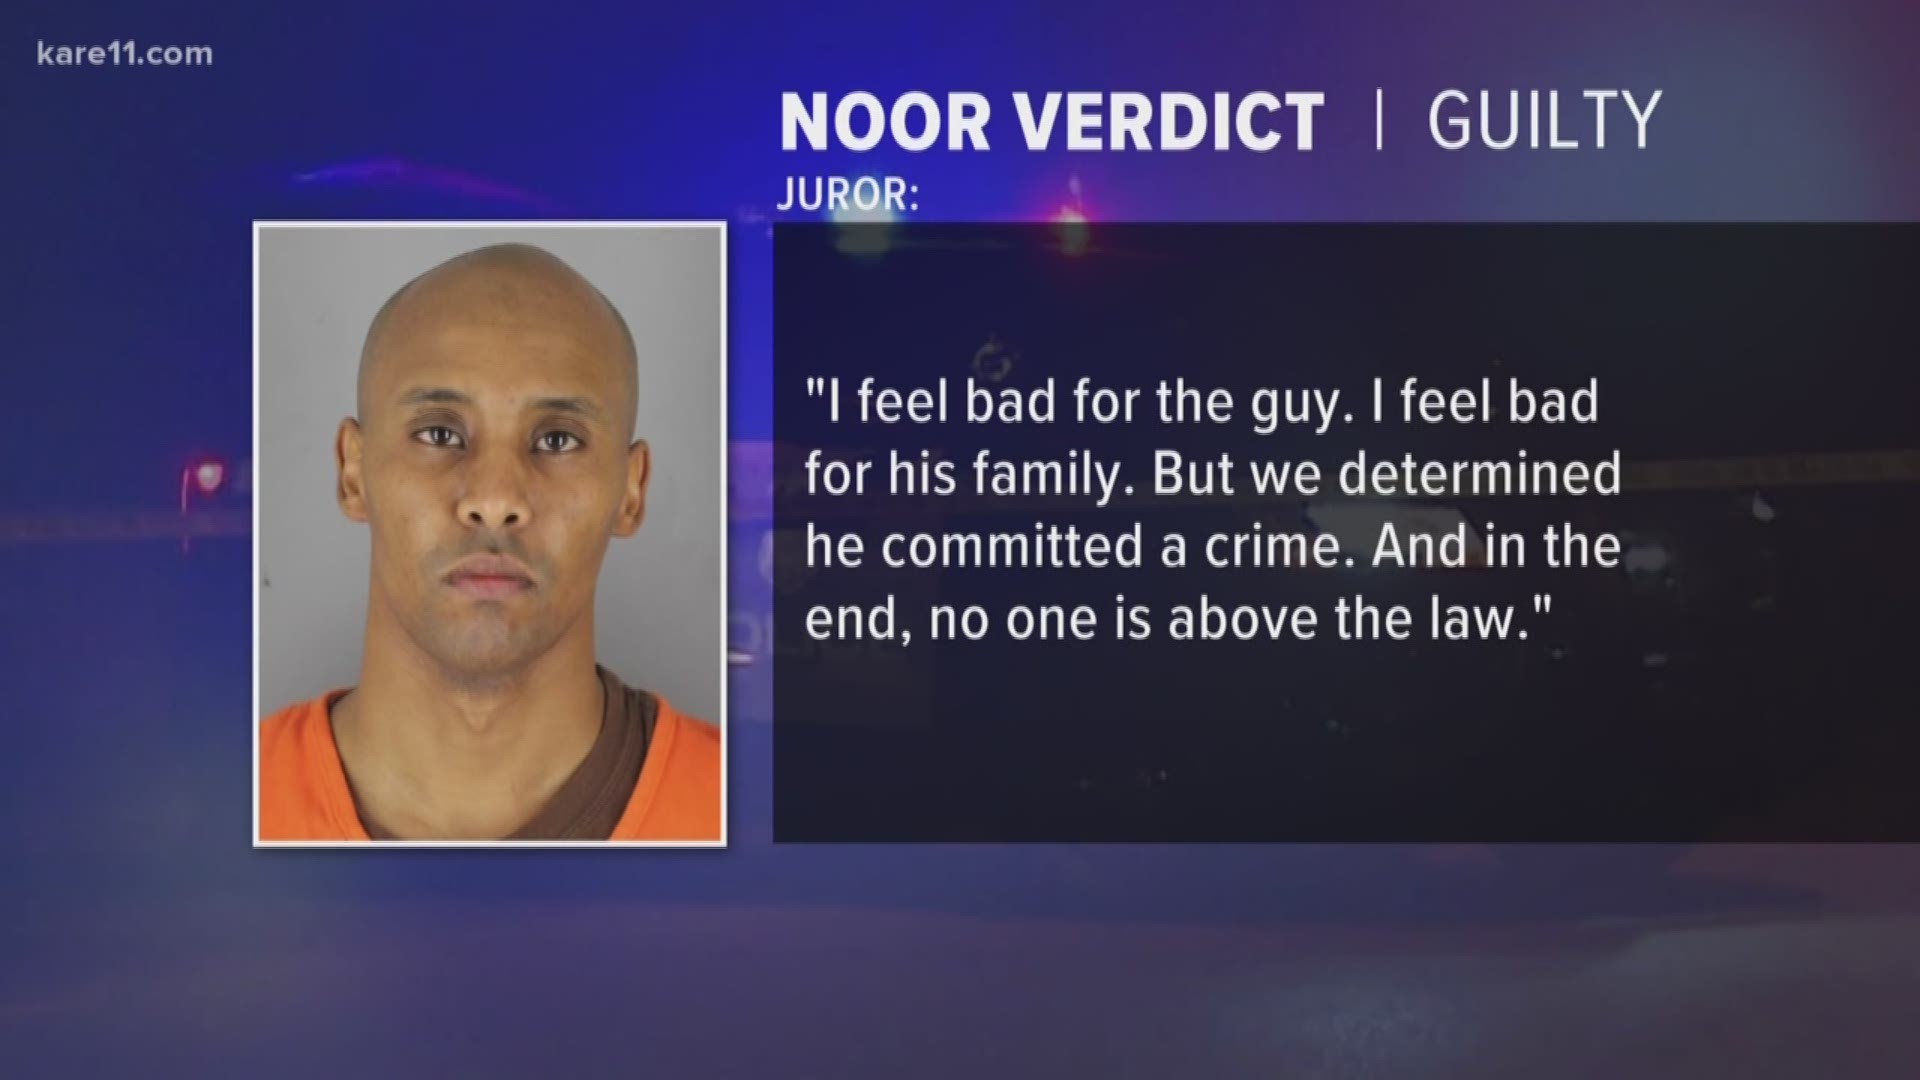 A juror who helped determined the verdict in the Mohamed Noor trial spoke to KARE 11. "I feel bad for the guy. I feel bad for his family. But we determined he committed a crime. And in the end, no one is above the law." https://kare11.tv/2GM8JBl